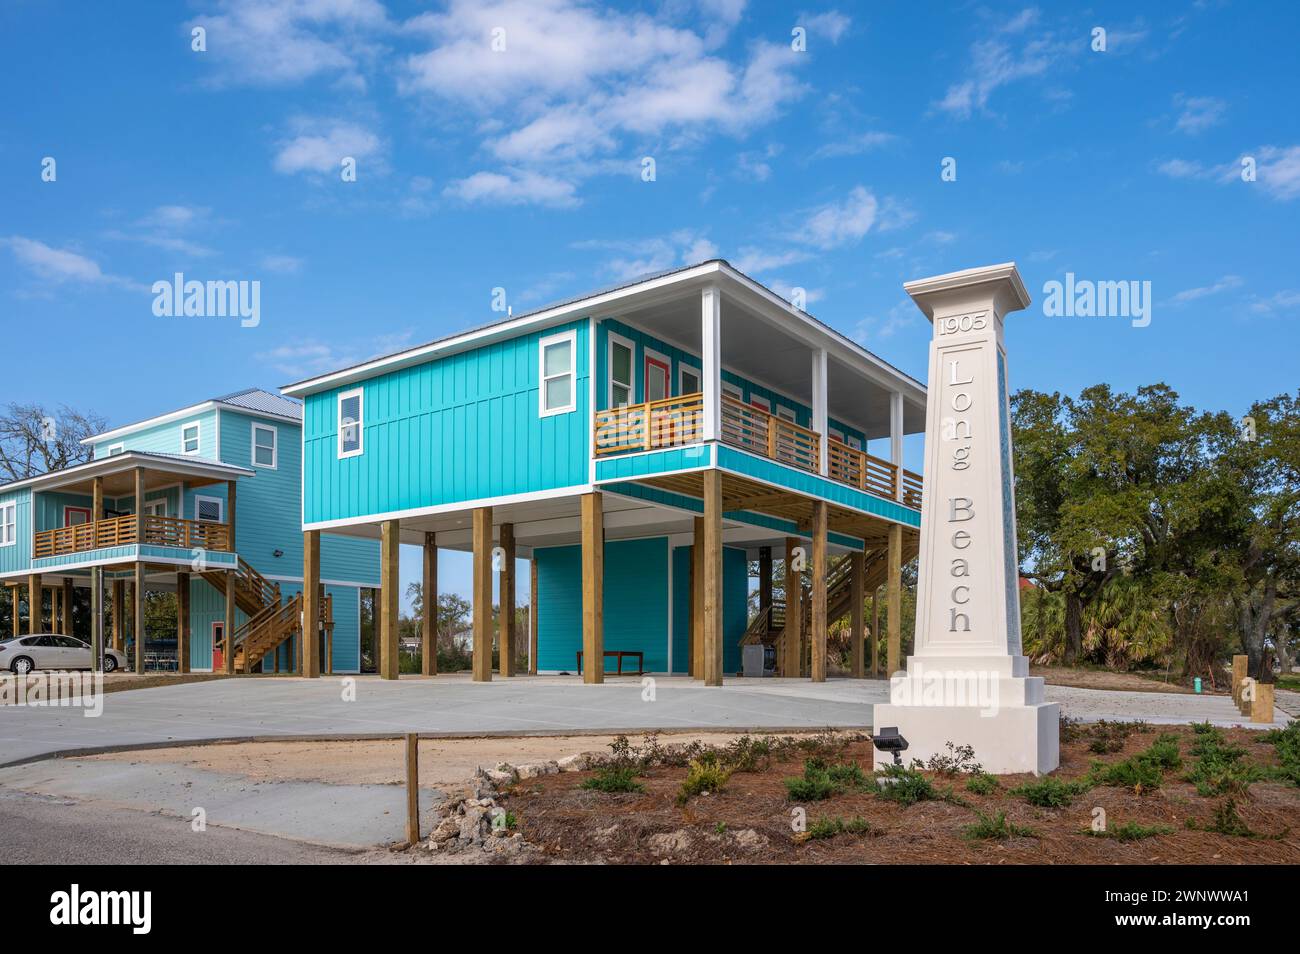 New home construction of elevated beach houses on stilts or piers, Mississippi Gulf Coast, USA. Stock Photo